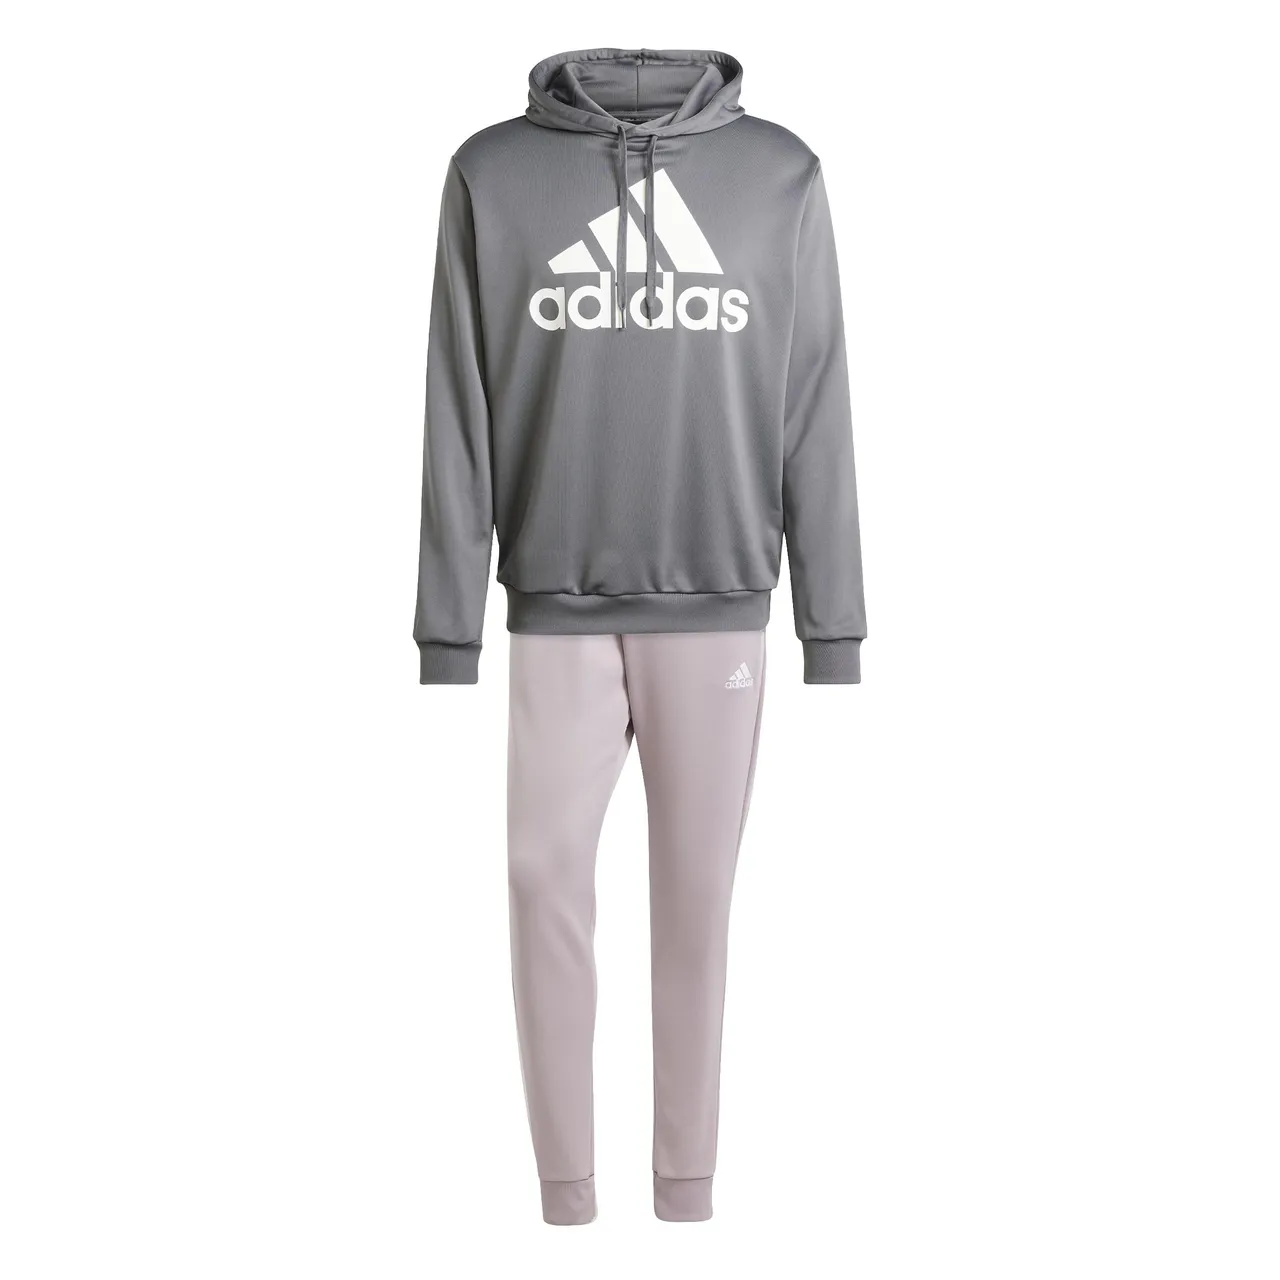 adidas Men's Sportswear French Terry Hooded Track Suit